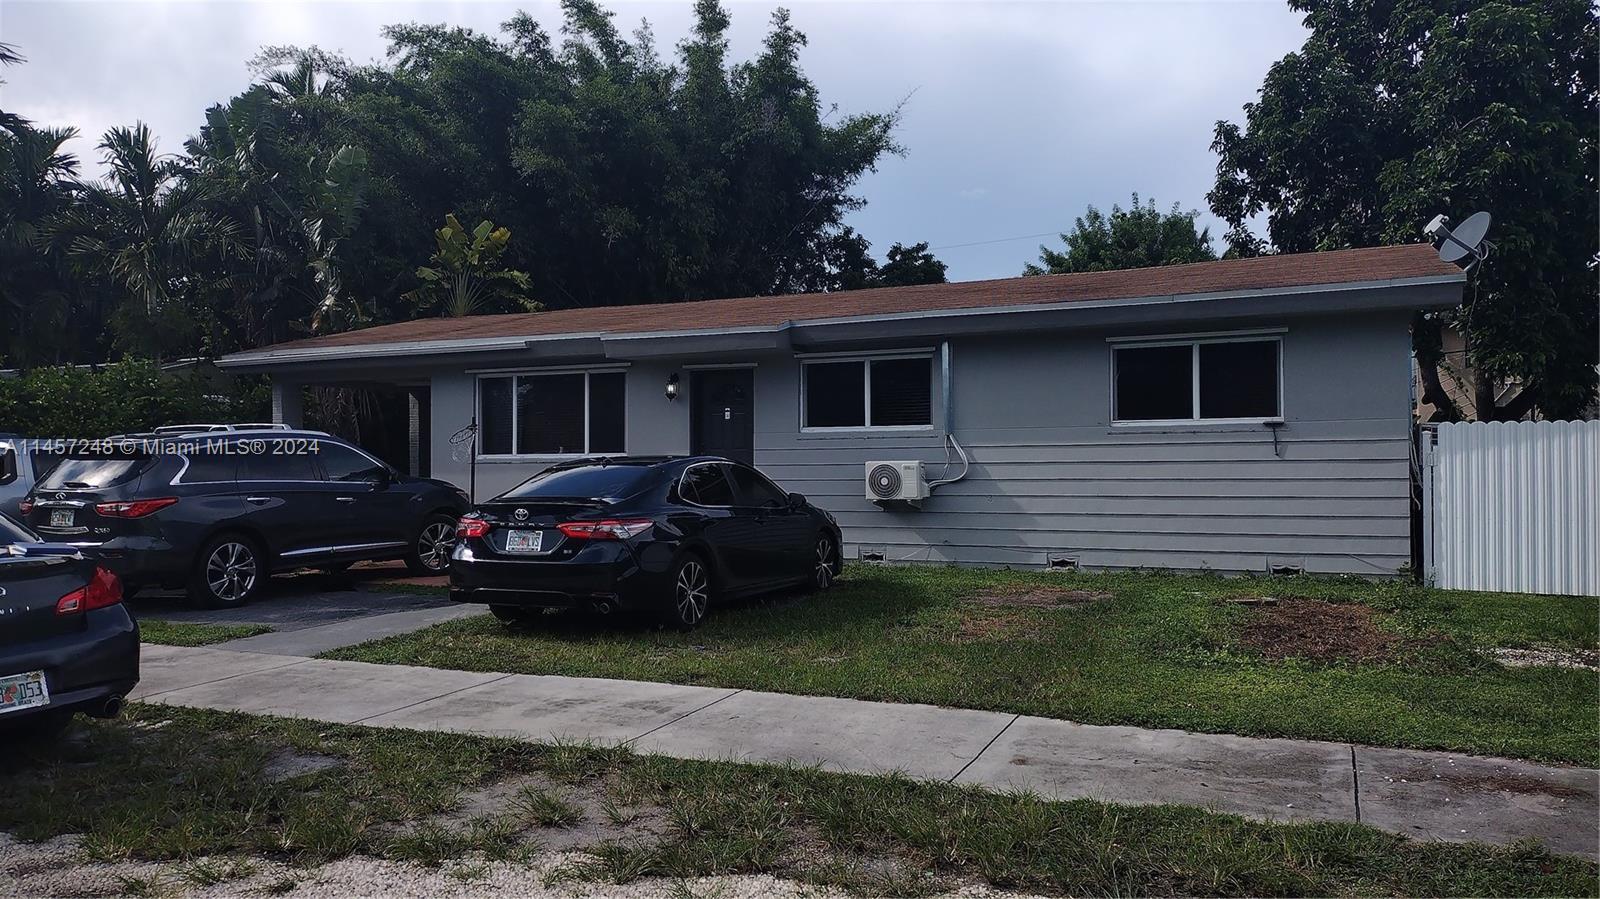 Photo of 1141 NW 112th St in Miami, FL